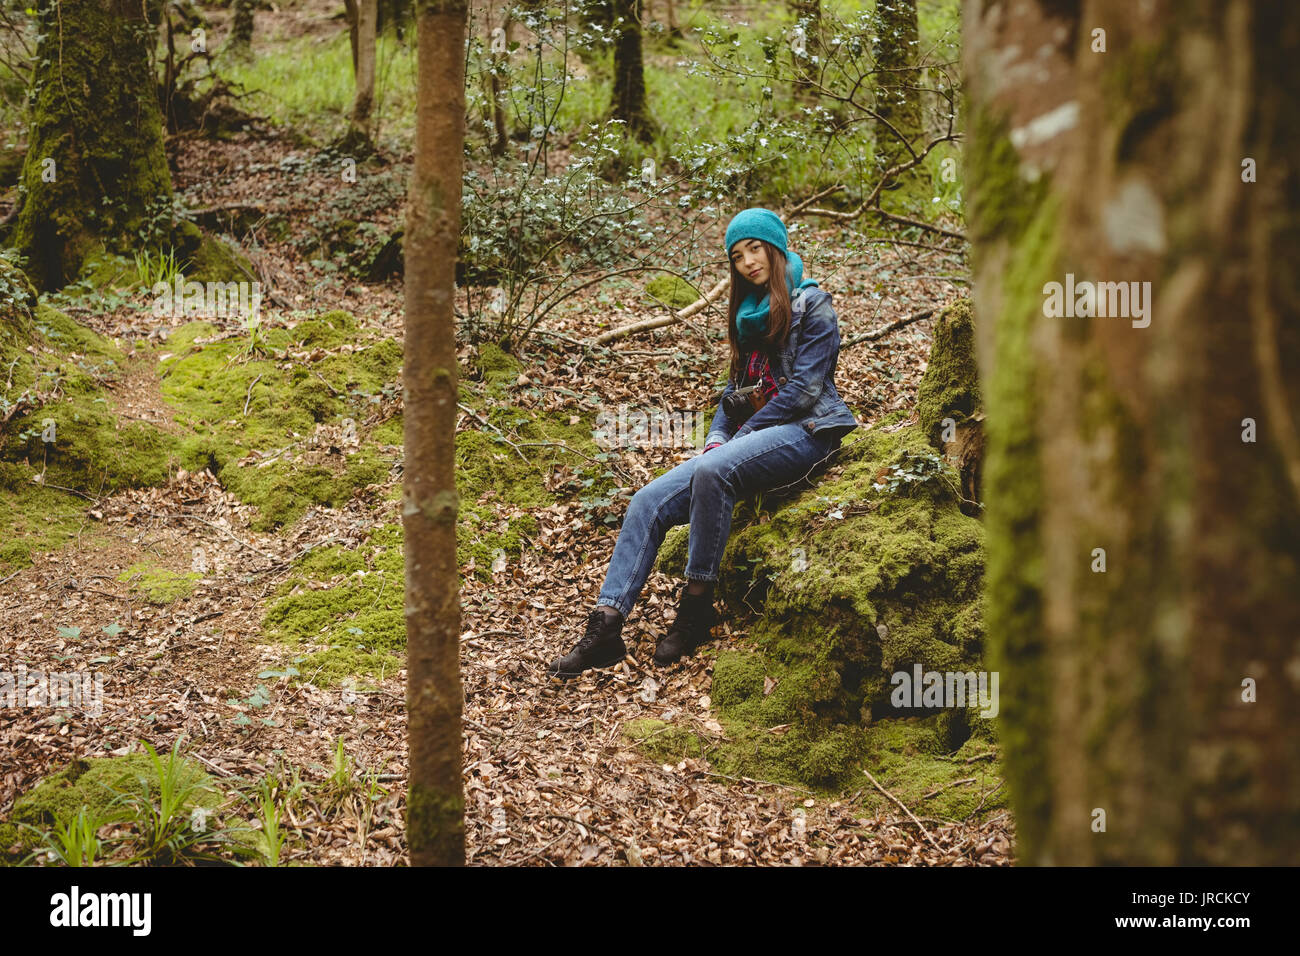 Portrait of woman sitting on rocks in forest Stock Photo